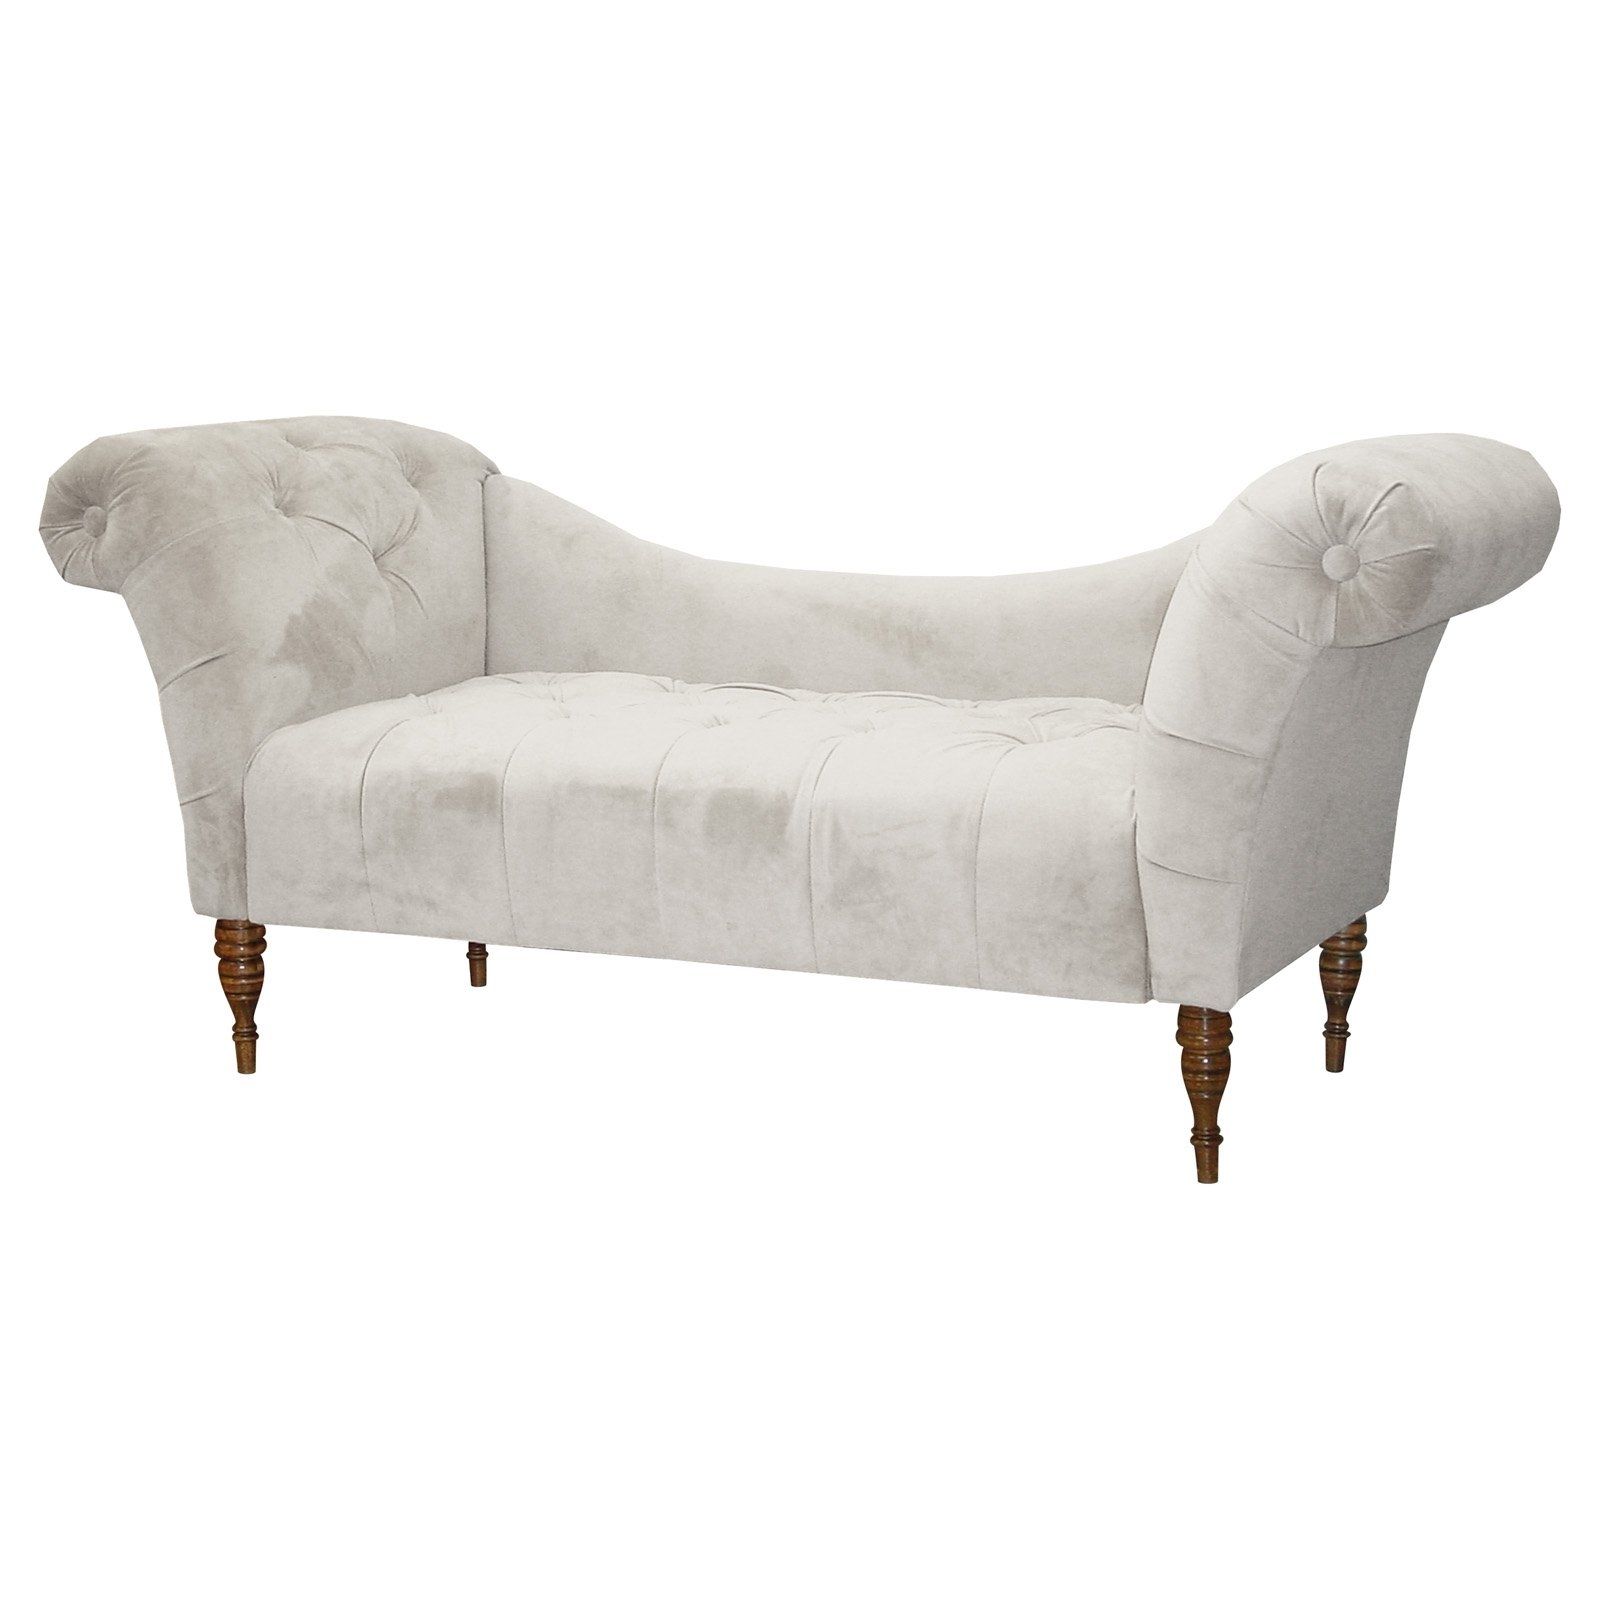 Fashionable Chaise Benchs Regarding Olivia Chaise Lounge – Velvet Dream (View 5 of 15)